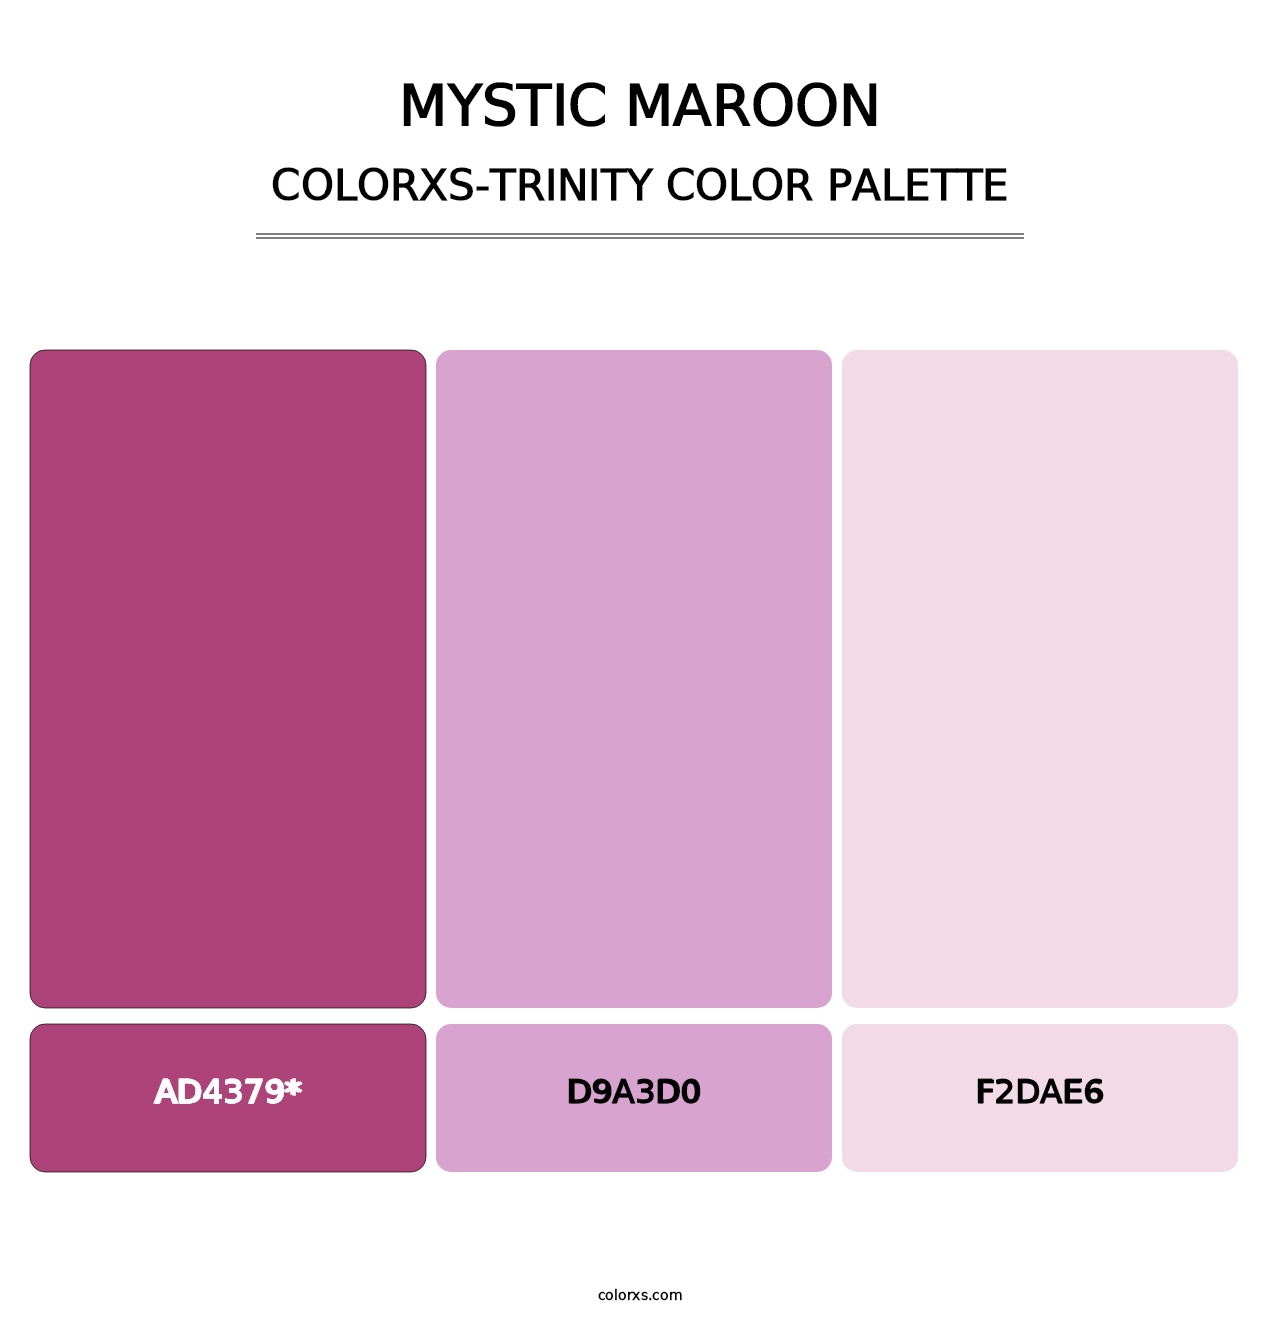 Mystic Maroon - Colorxs Trinity Palette